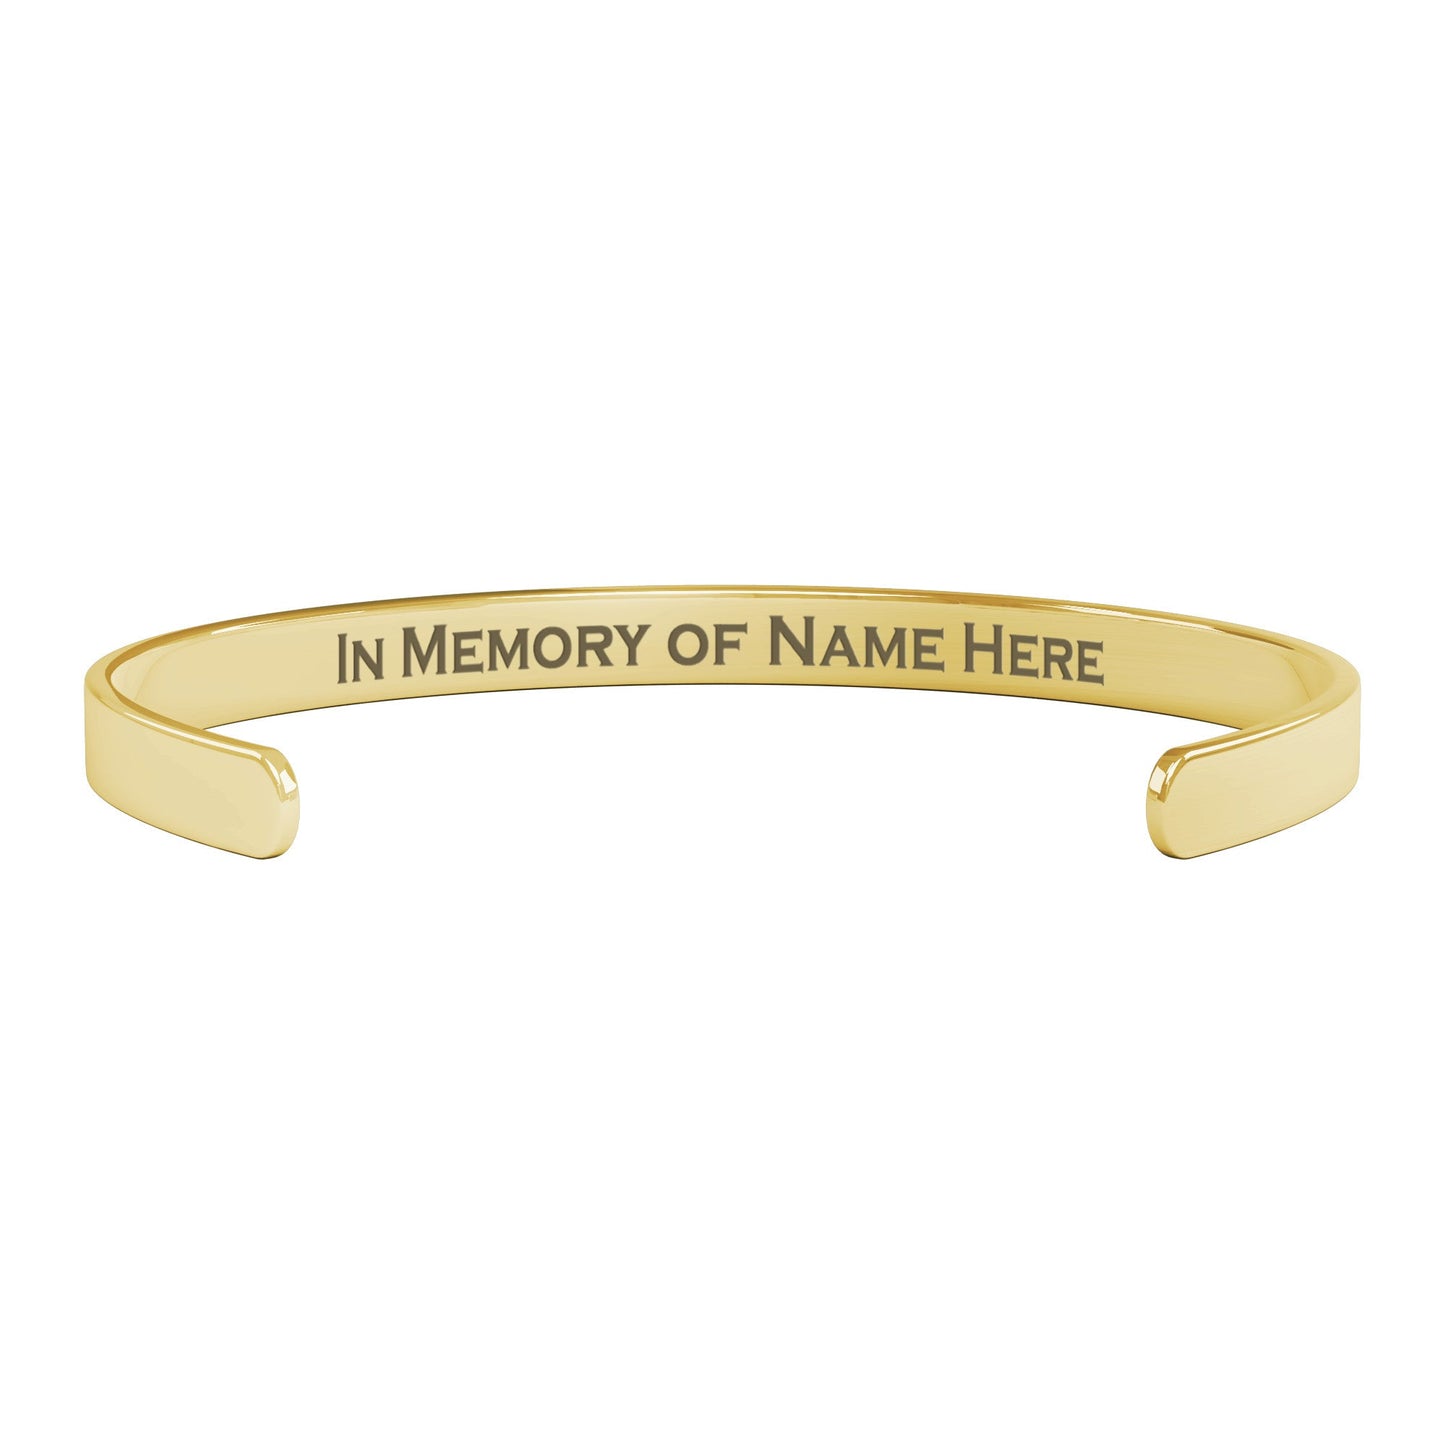 Personalized Liver Cancer Awareness Cuff Bracelet |x|